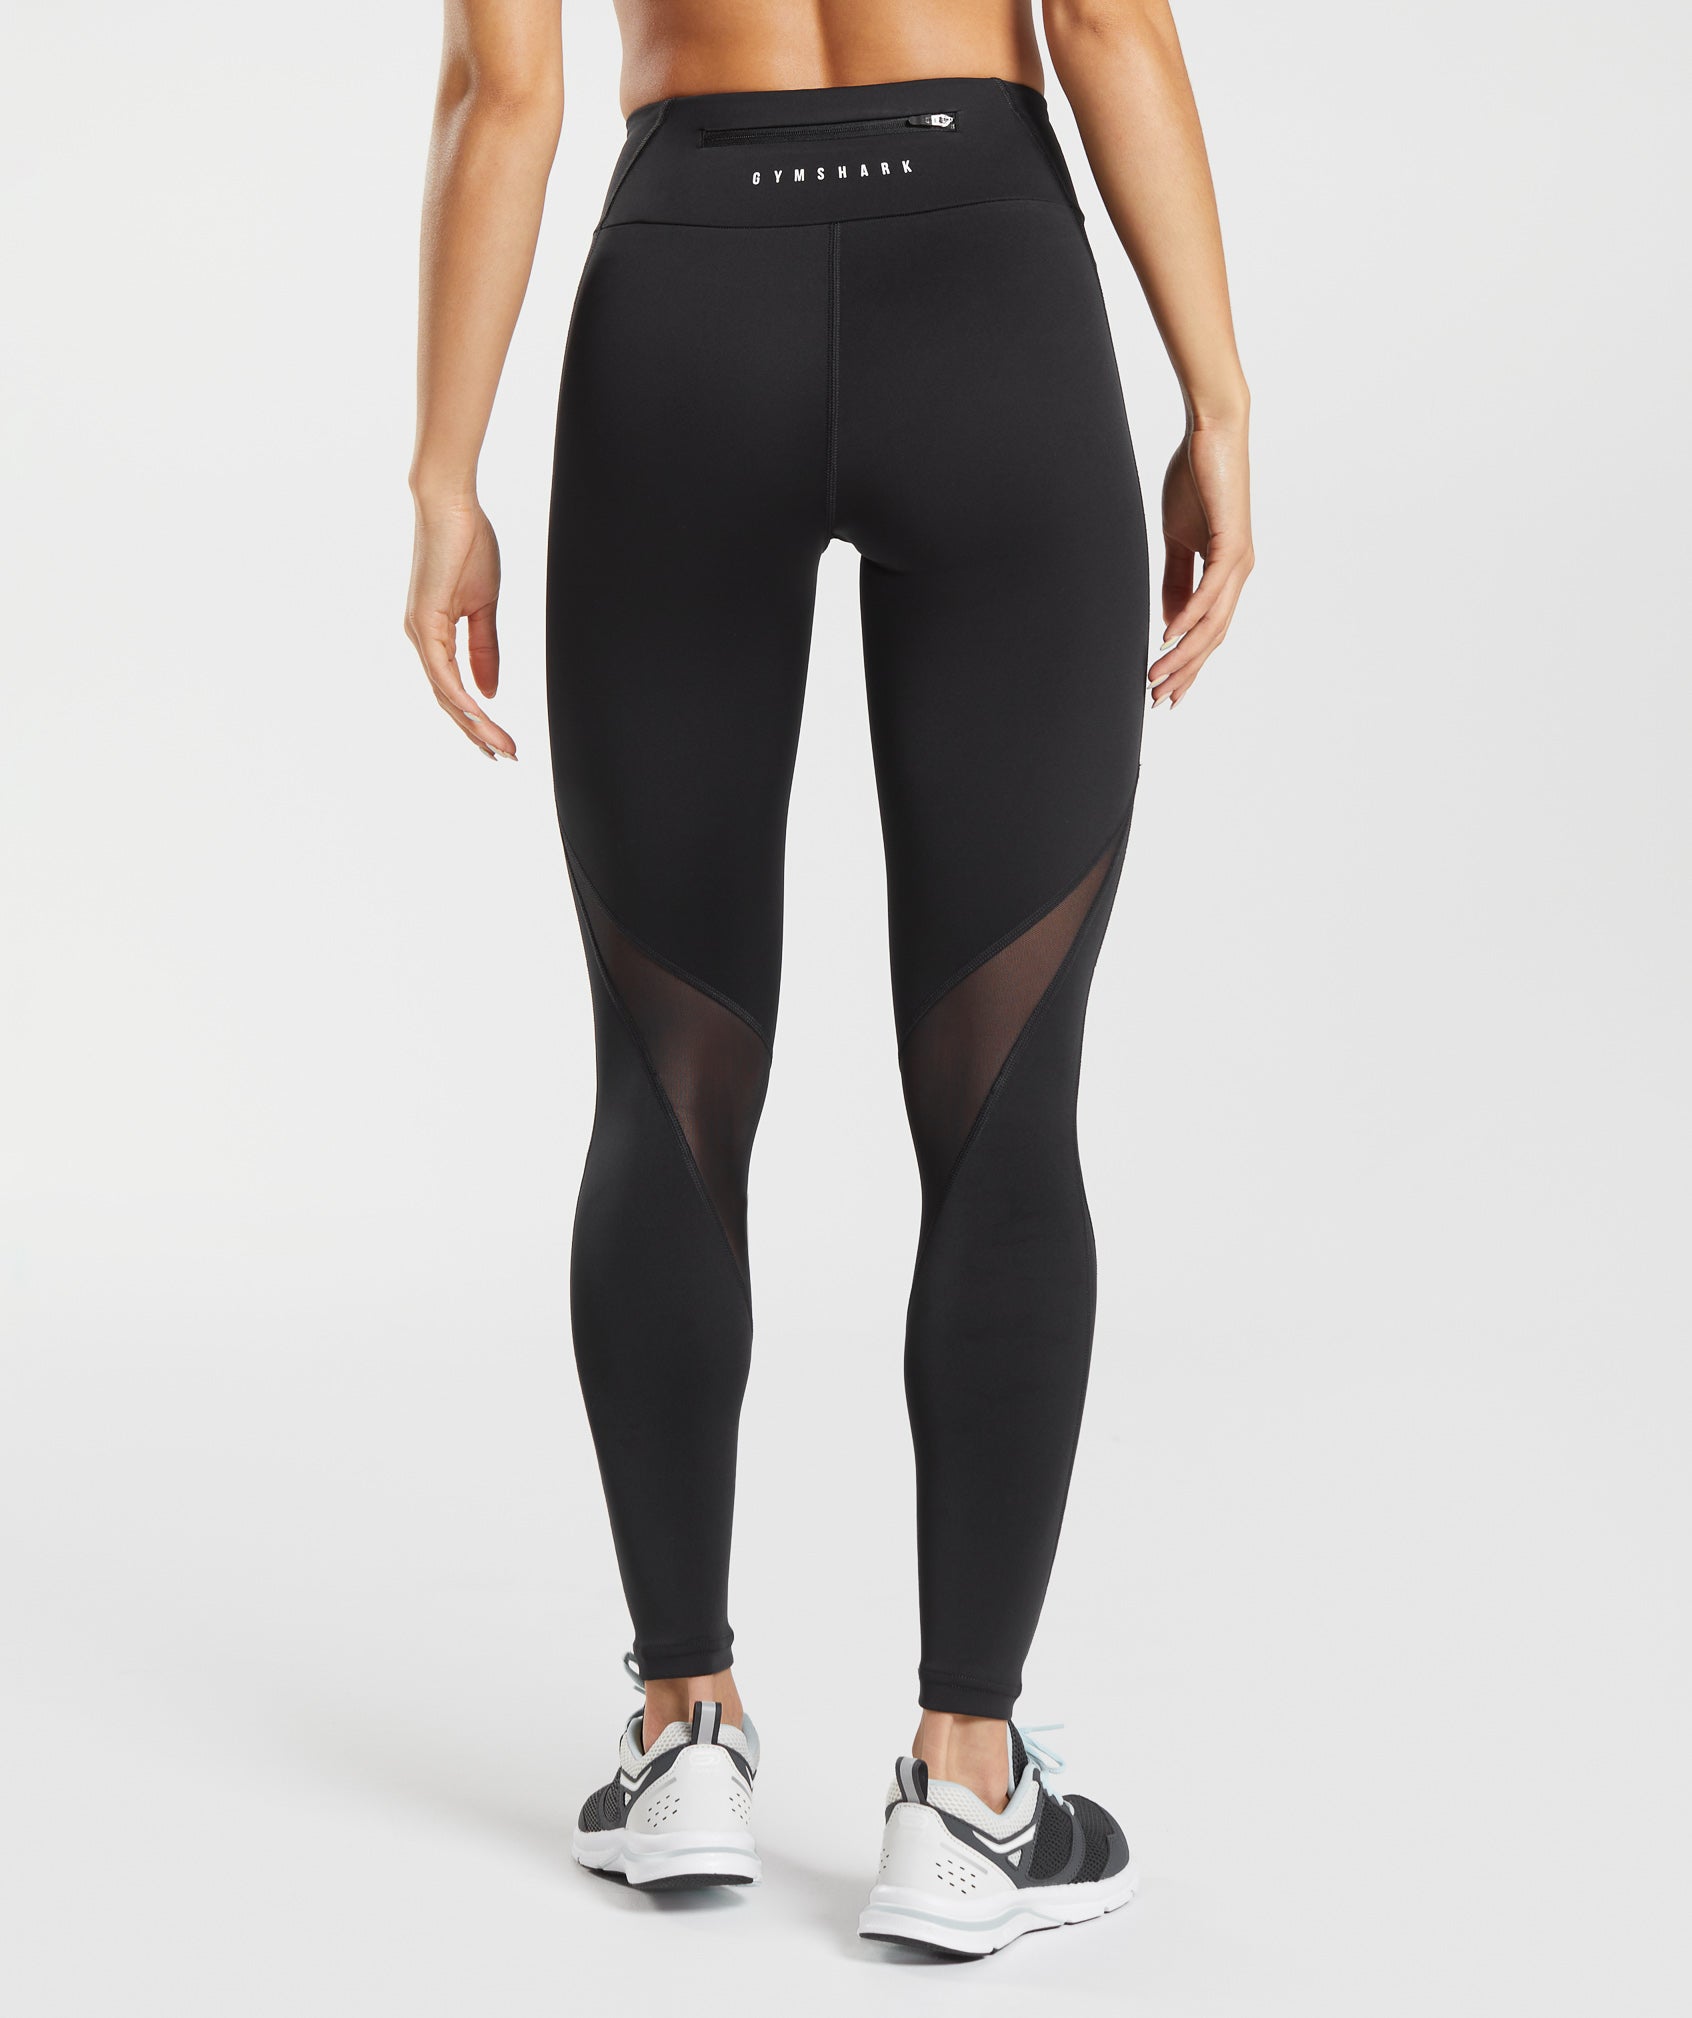 Mens Longstreet of Death Inspired Athletic Leggings: Perfect for Runni –  Soldier Complex